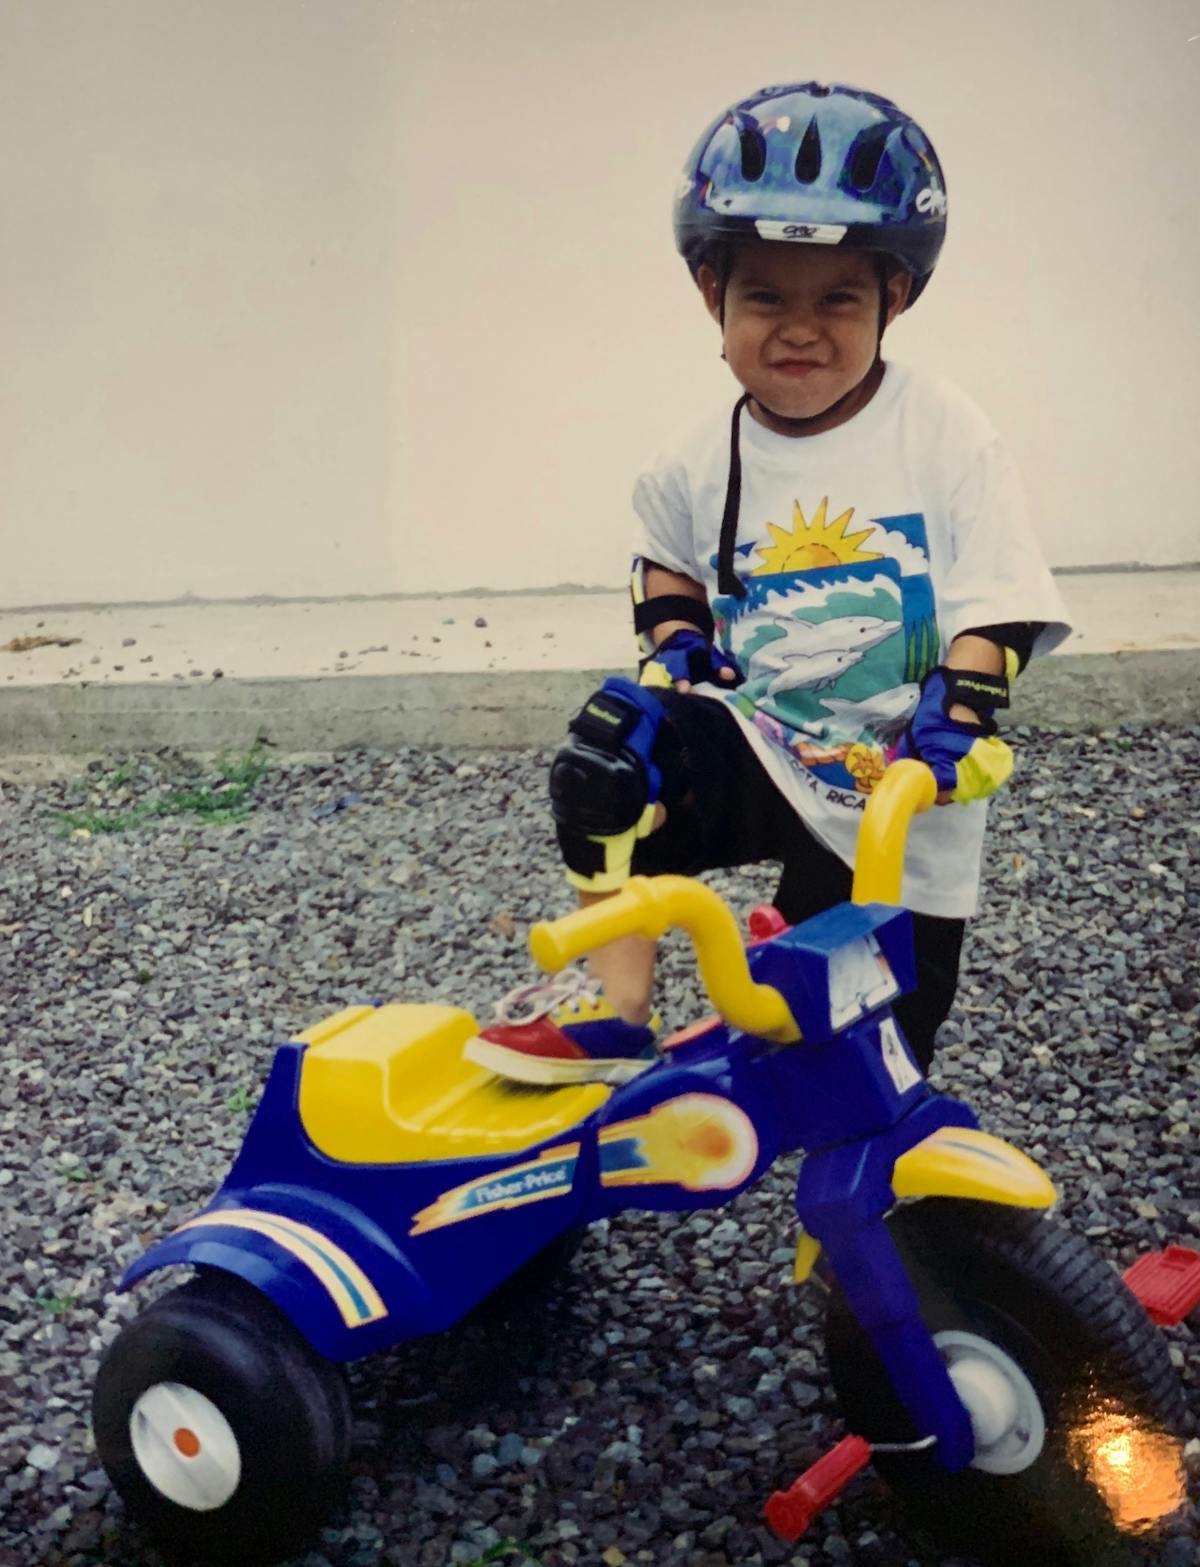 a young boy riding a toy motorcycle